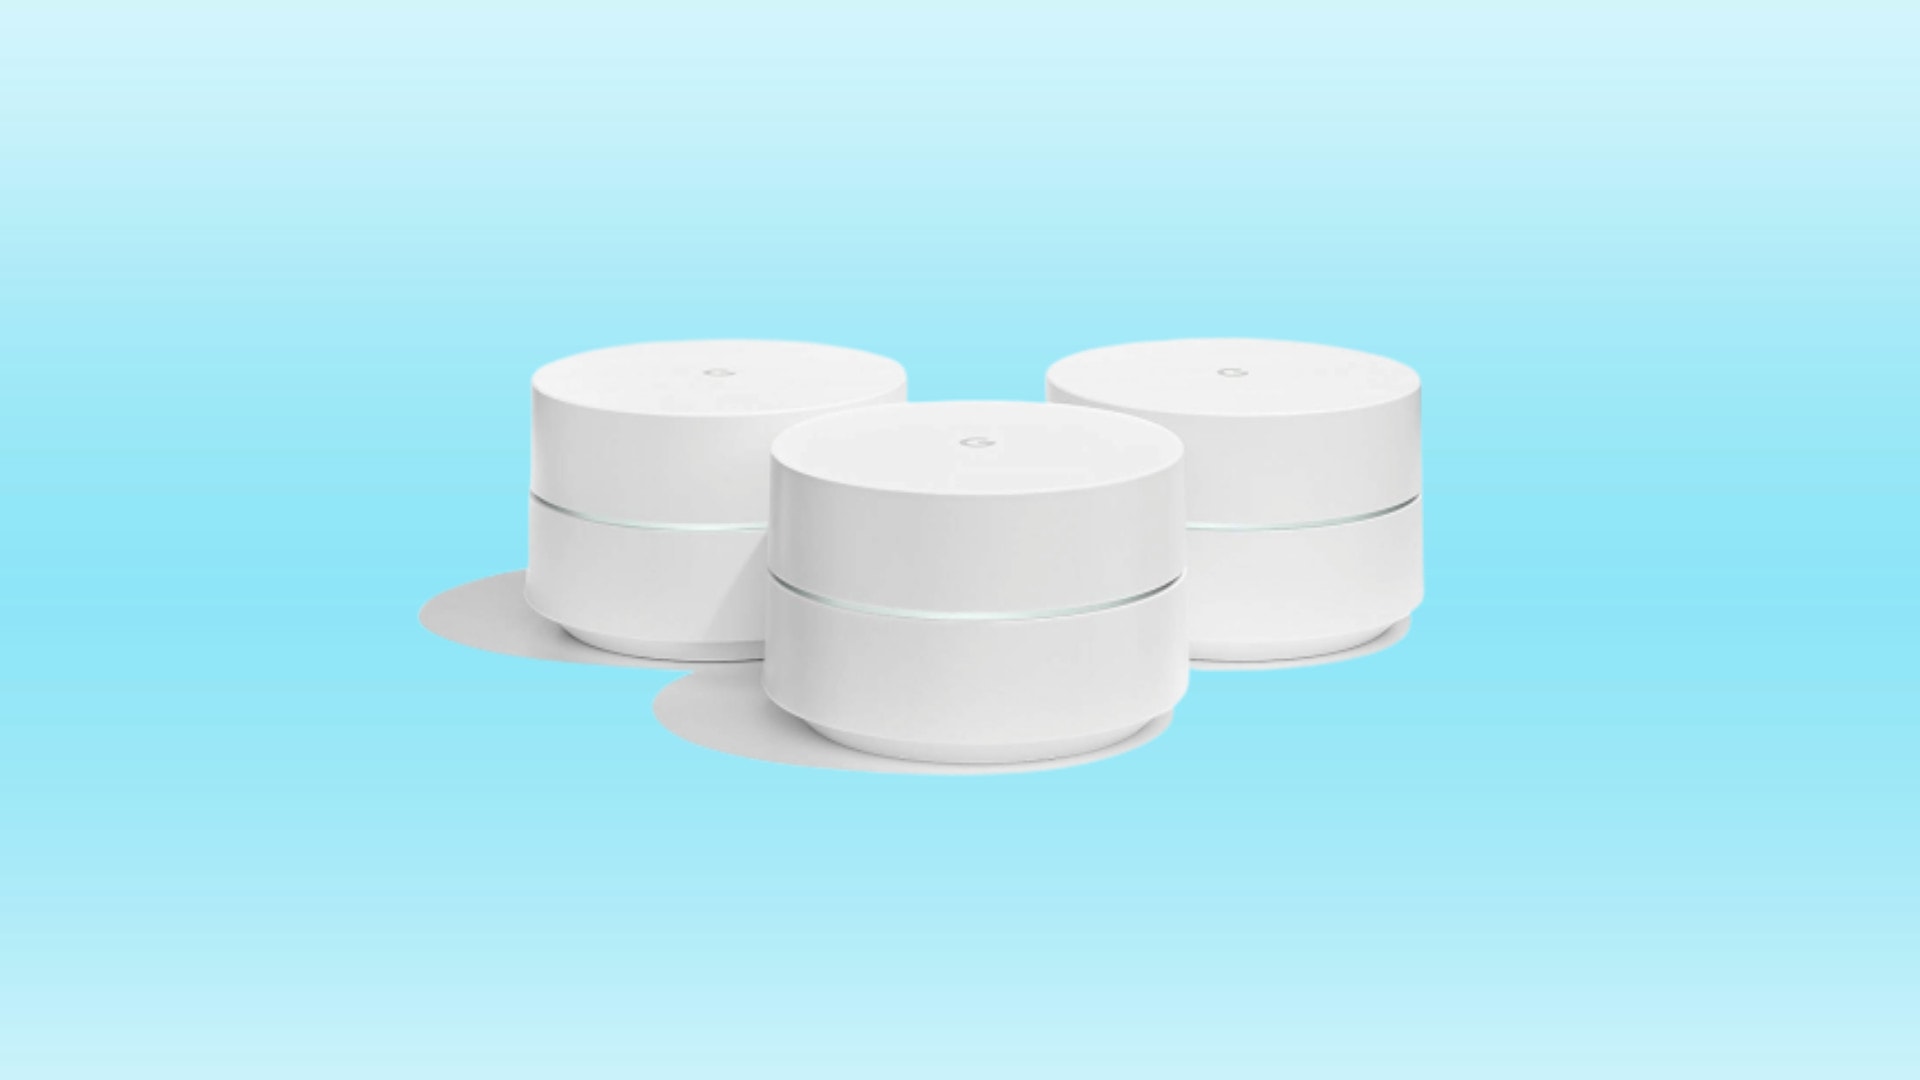 Mesh Wi-Fi system by Google